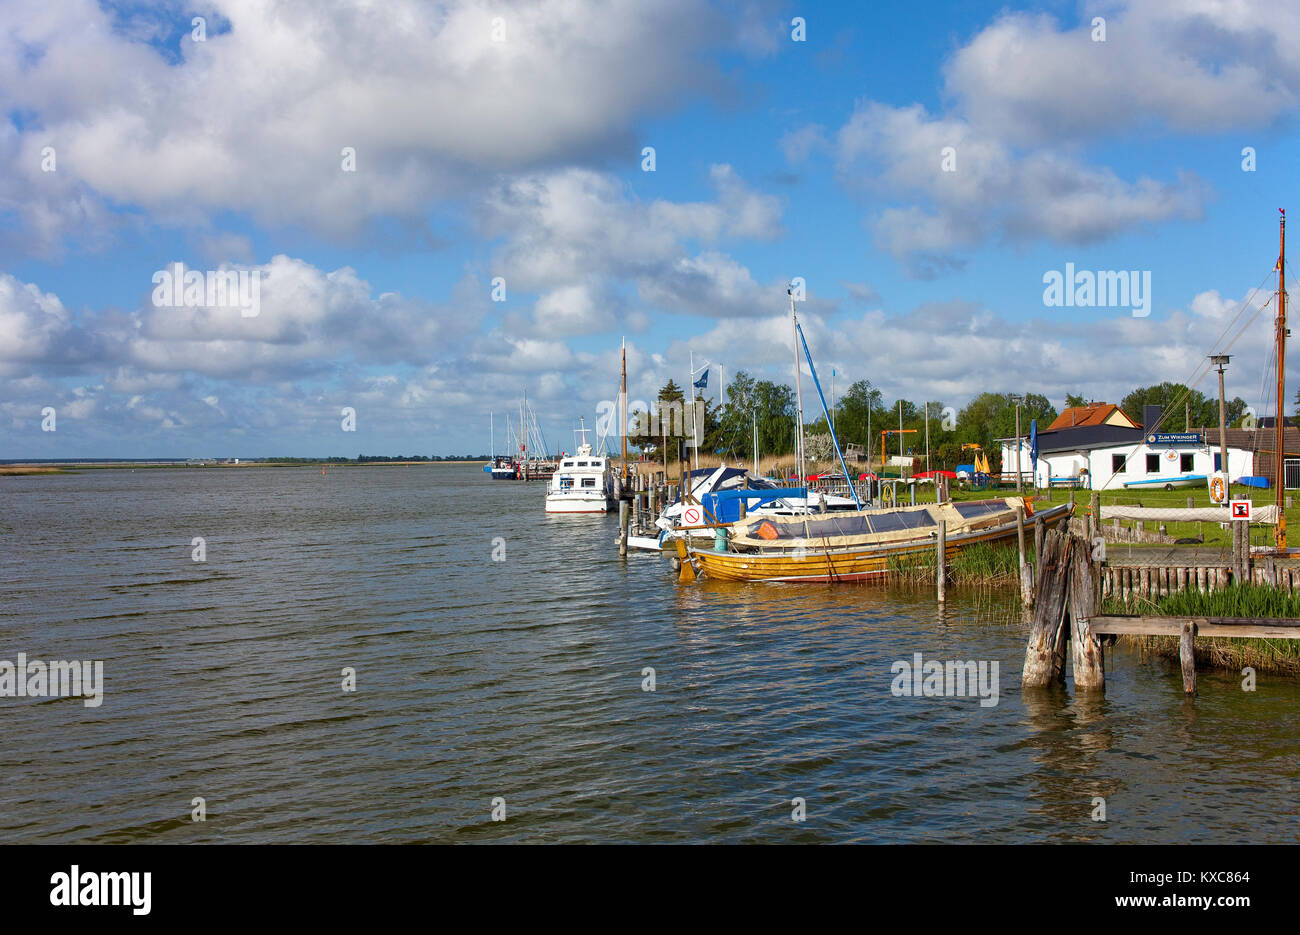 Boats at the Zingster Strom, Zingst, Fishland, Mecklenburg-Western Pomerania, Baltic sea, Germany, Europe Stock Photo